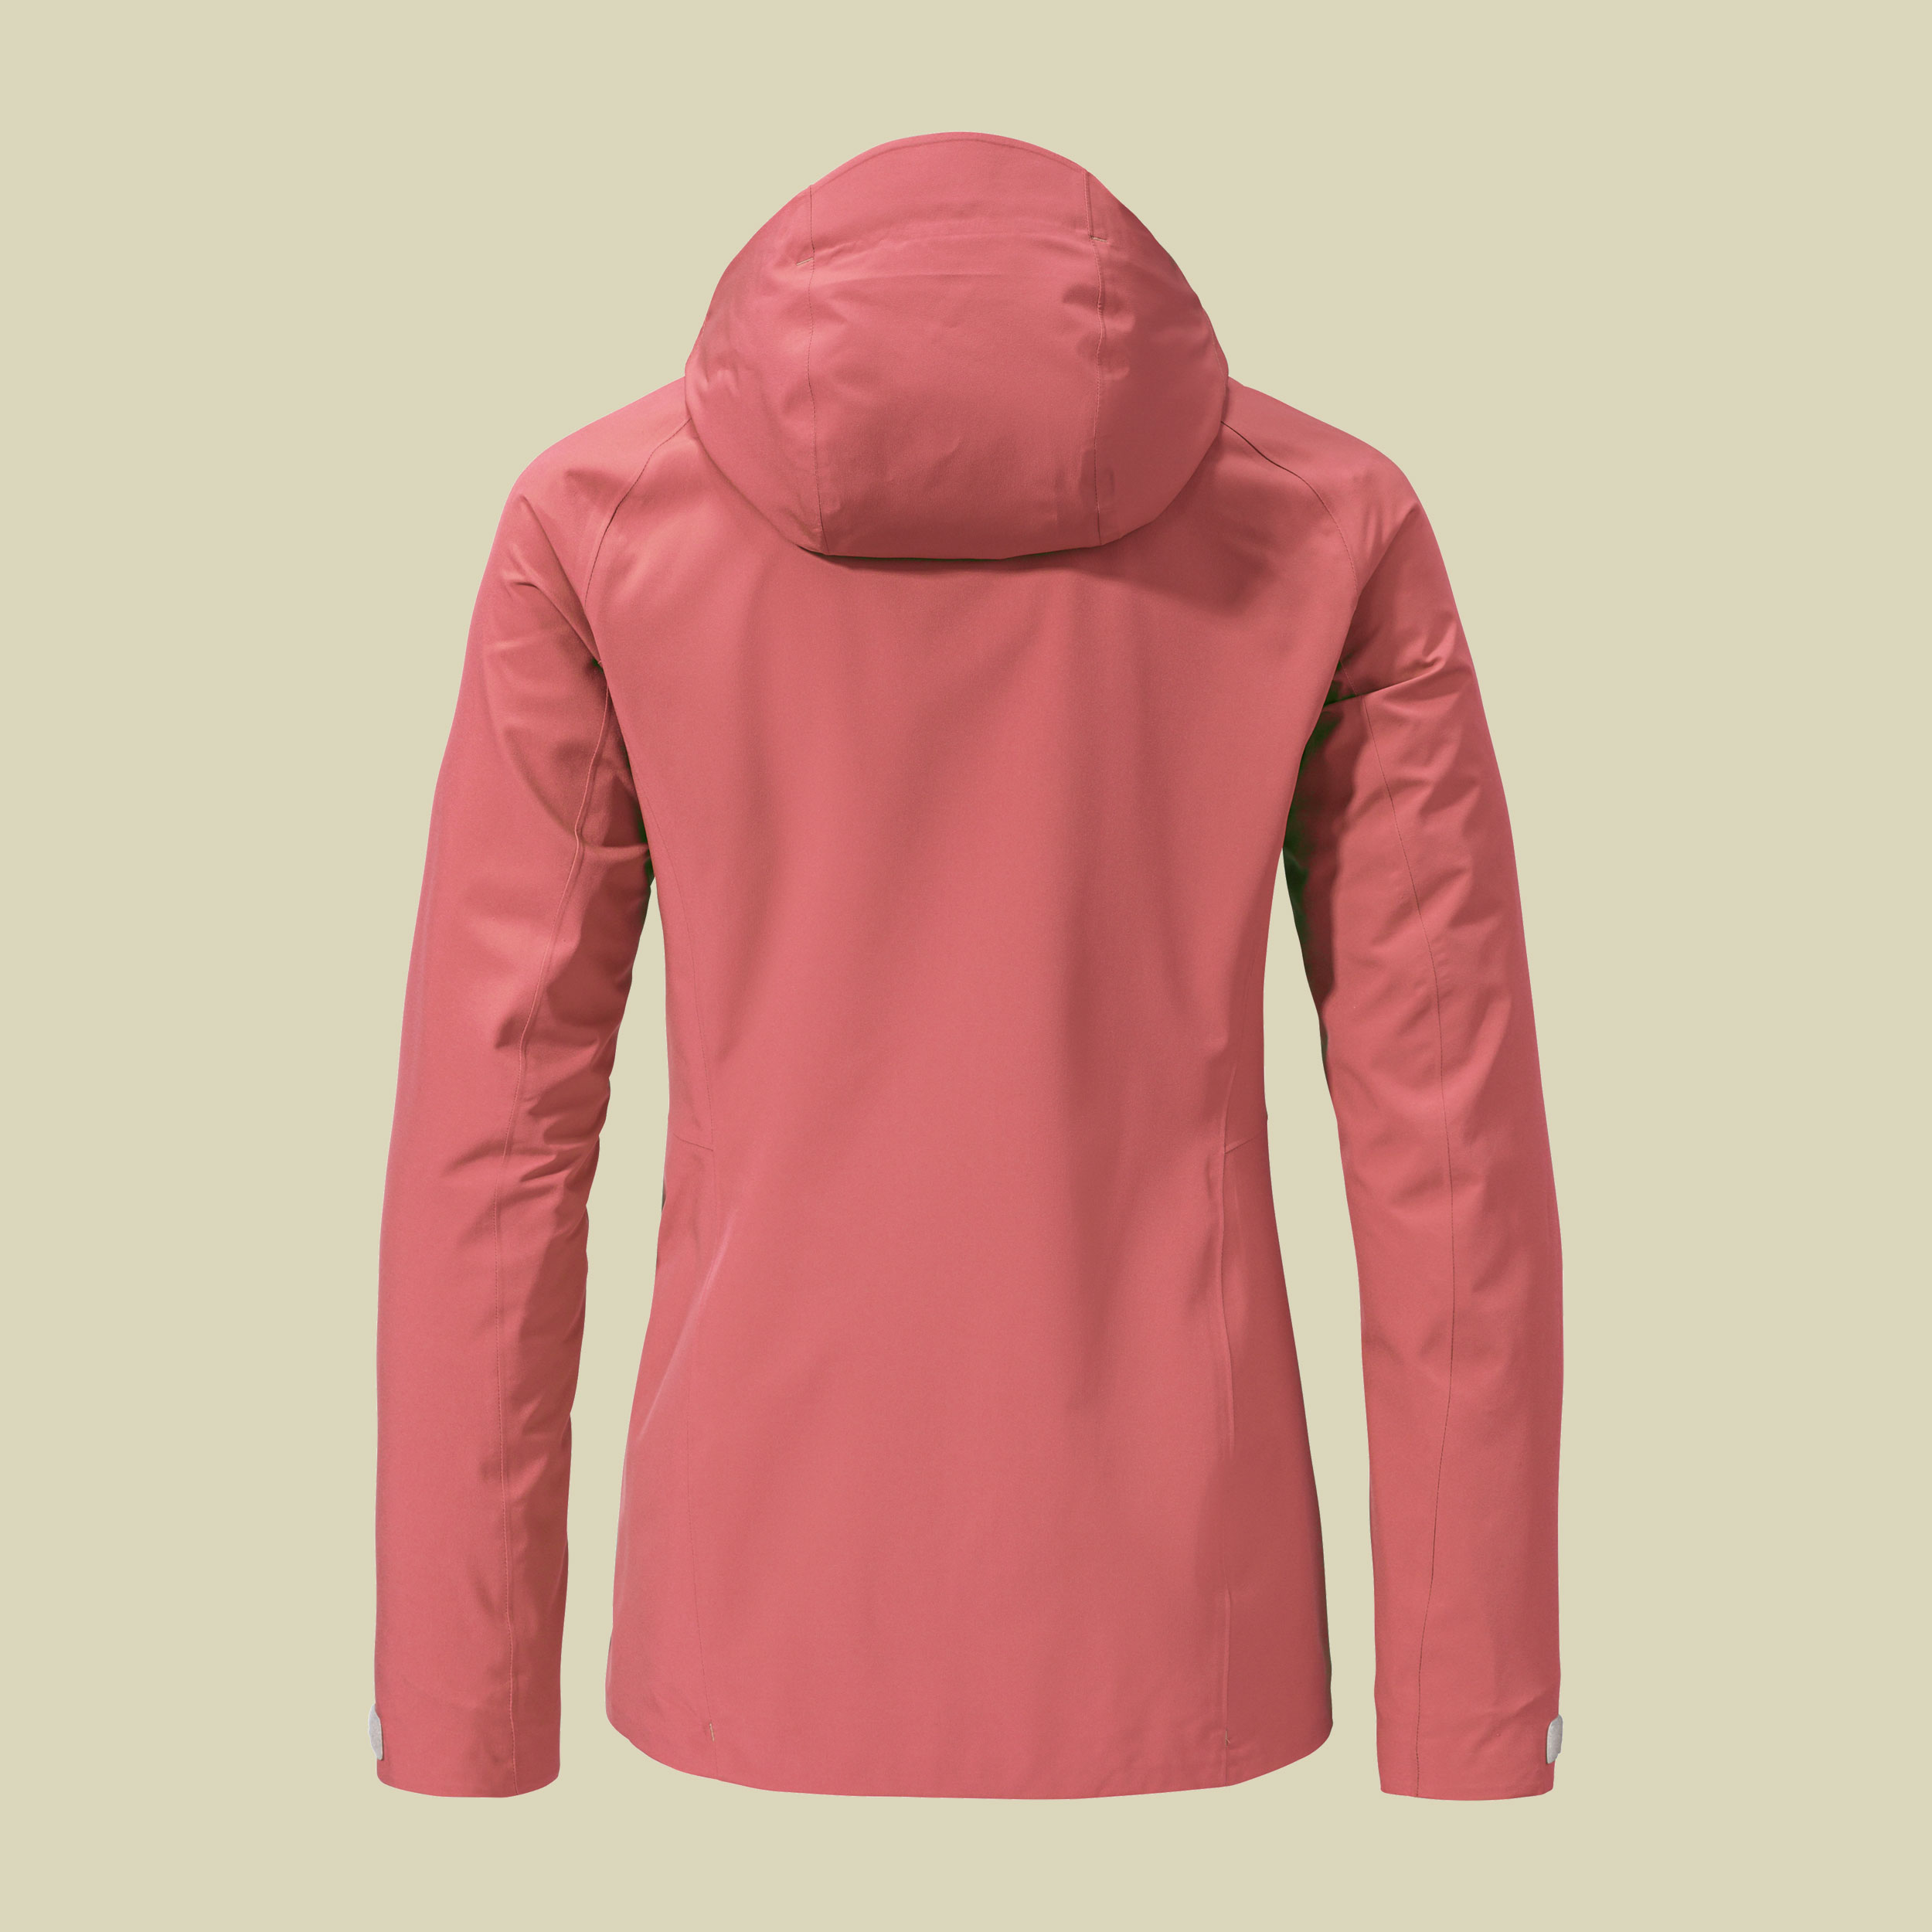 2L Jacket Ankelspitz L Women 42 pink - clasping rose